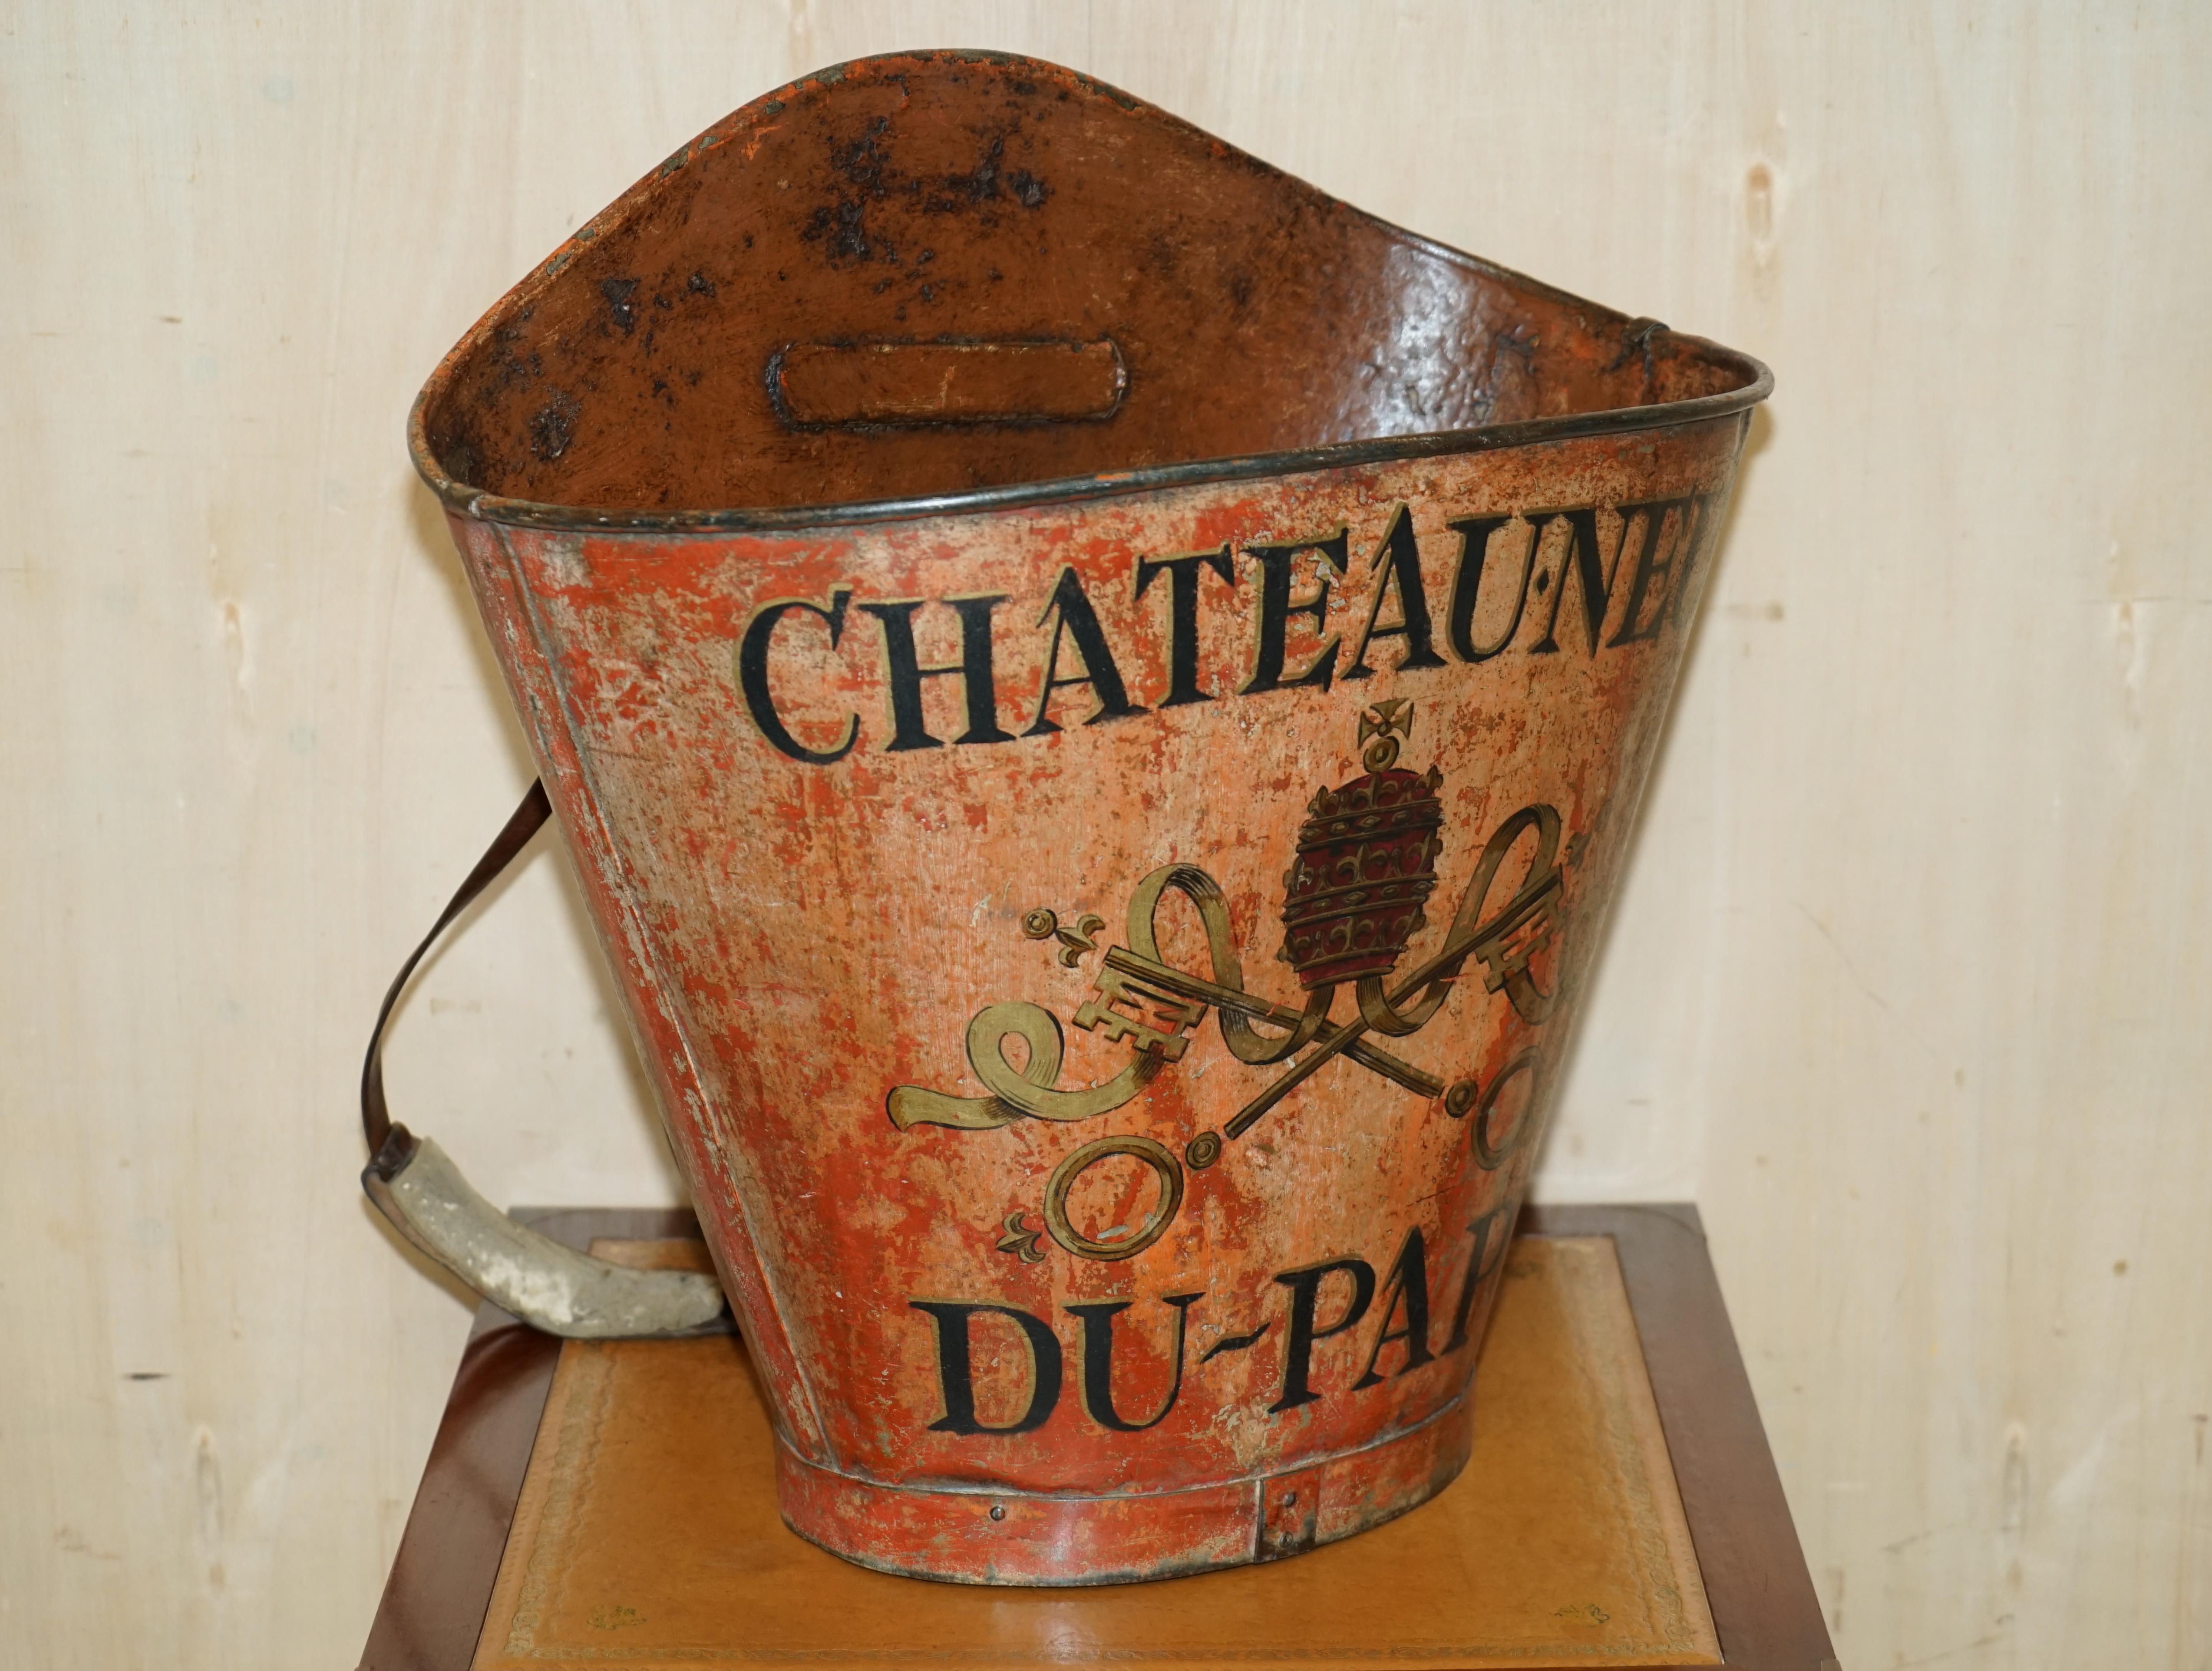 We are delighted to offer for sale this stunning original circa 1860-1880 French Grape Hod with paint armorial reading CHATEAUNEF DU PAPE.

A truly stunning and super original example, ideally suited as a coat scuttle, log bin or umbrella stand in